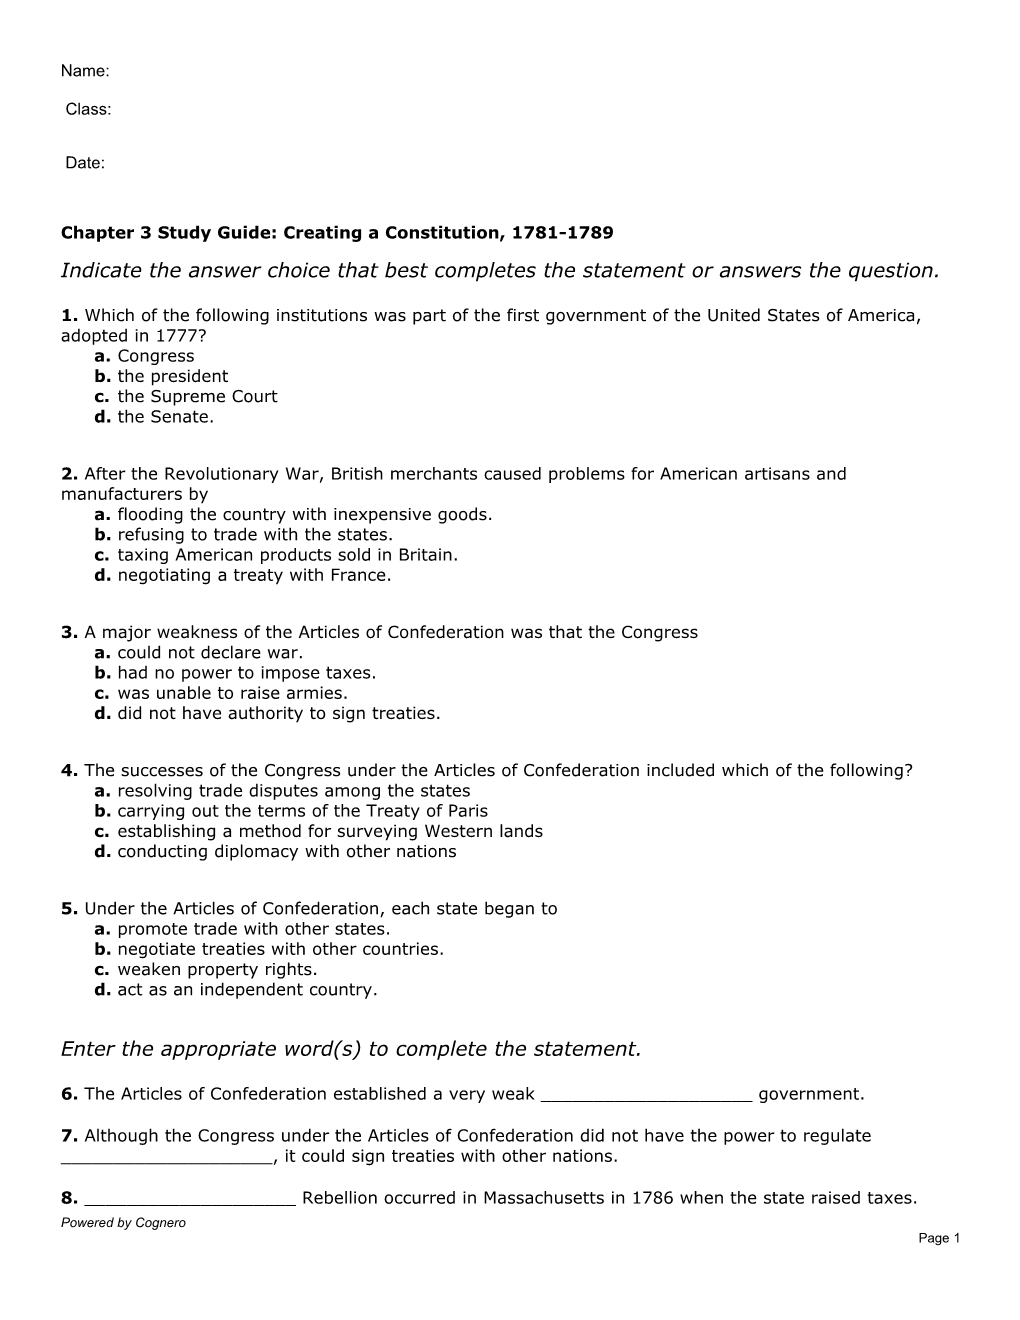 Chapter 3 Creating a Constitution, 1781-1789 Lesson 1 Quiz